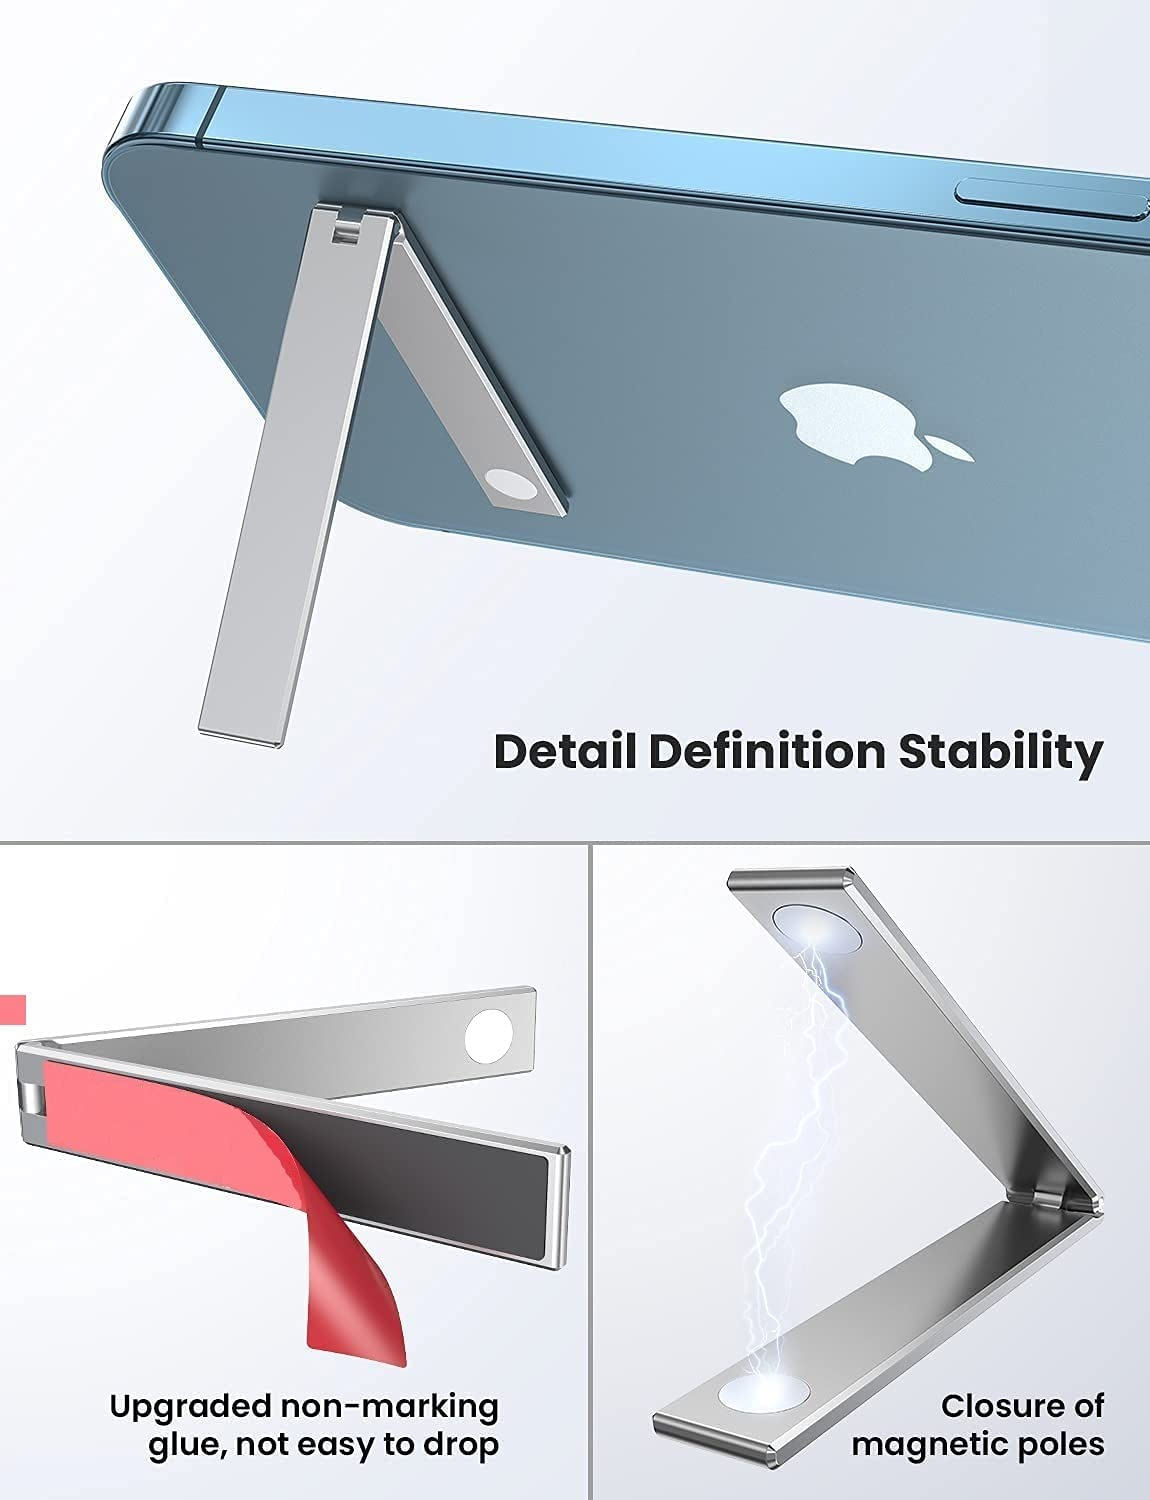 Foldable Tabletop Thin Pocket Magnetic Mobile Kickstand (Silver)